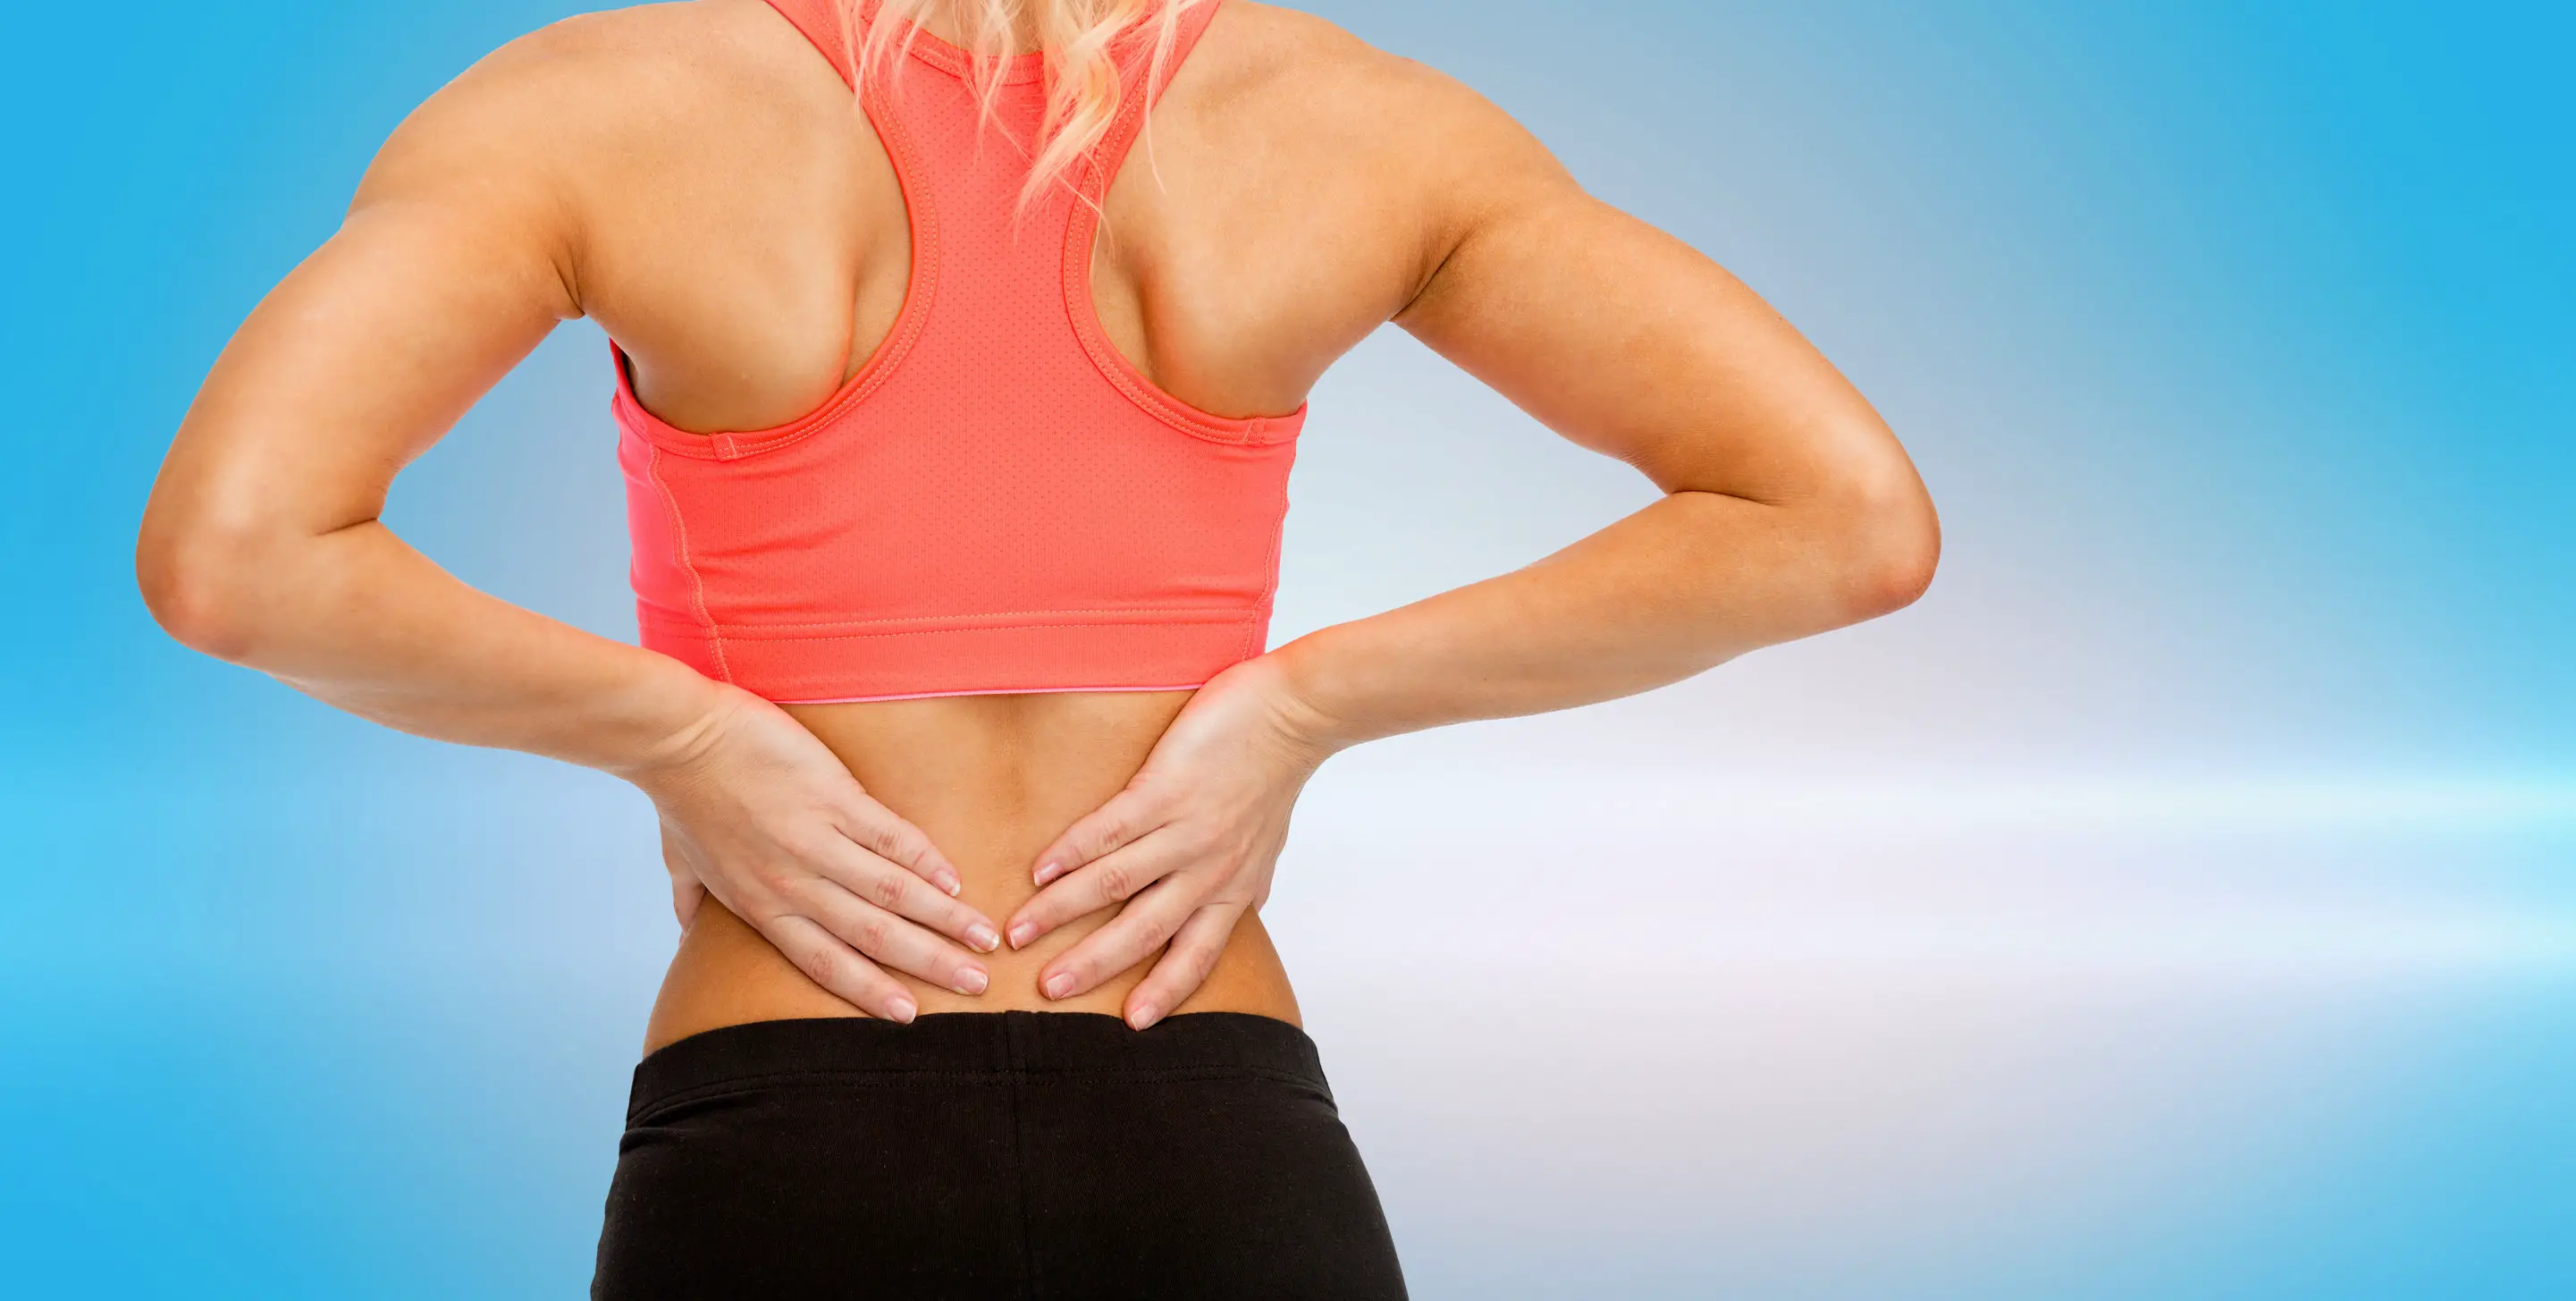 Back Pain Management: Stretches To Ease Lower Back Aches